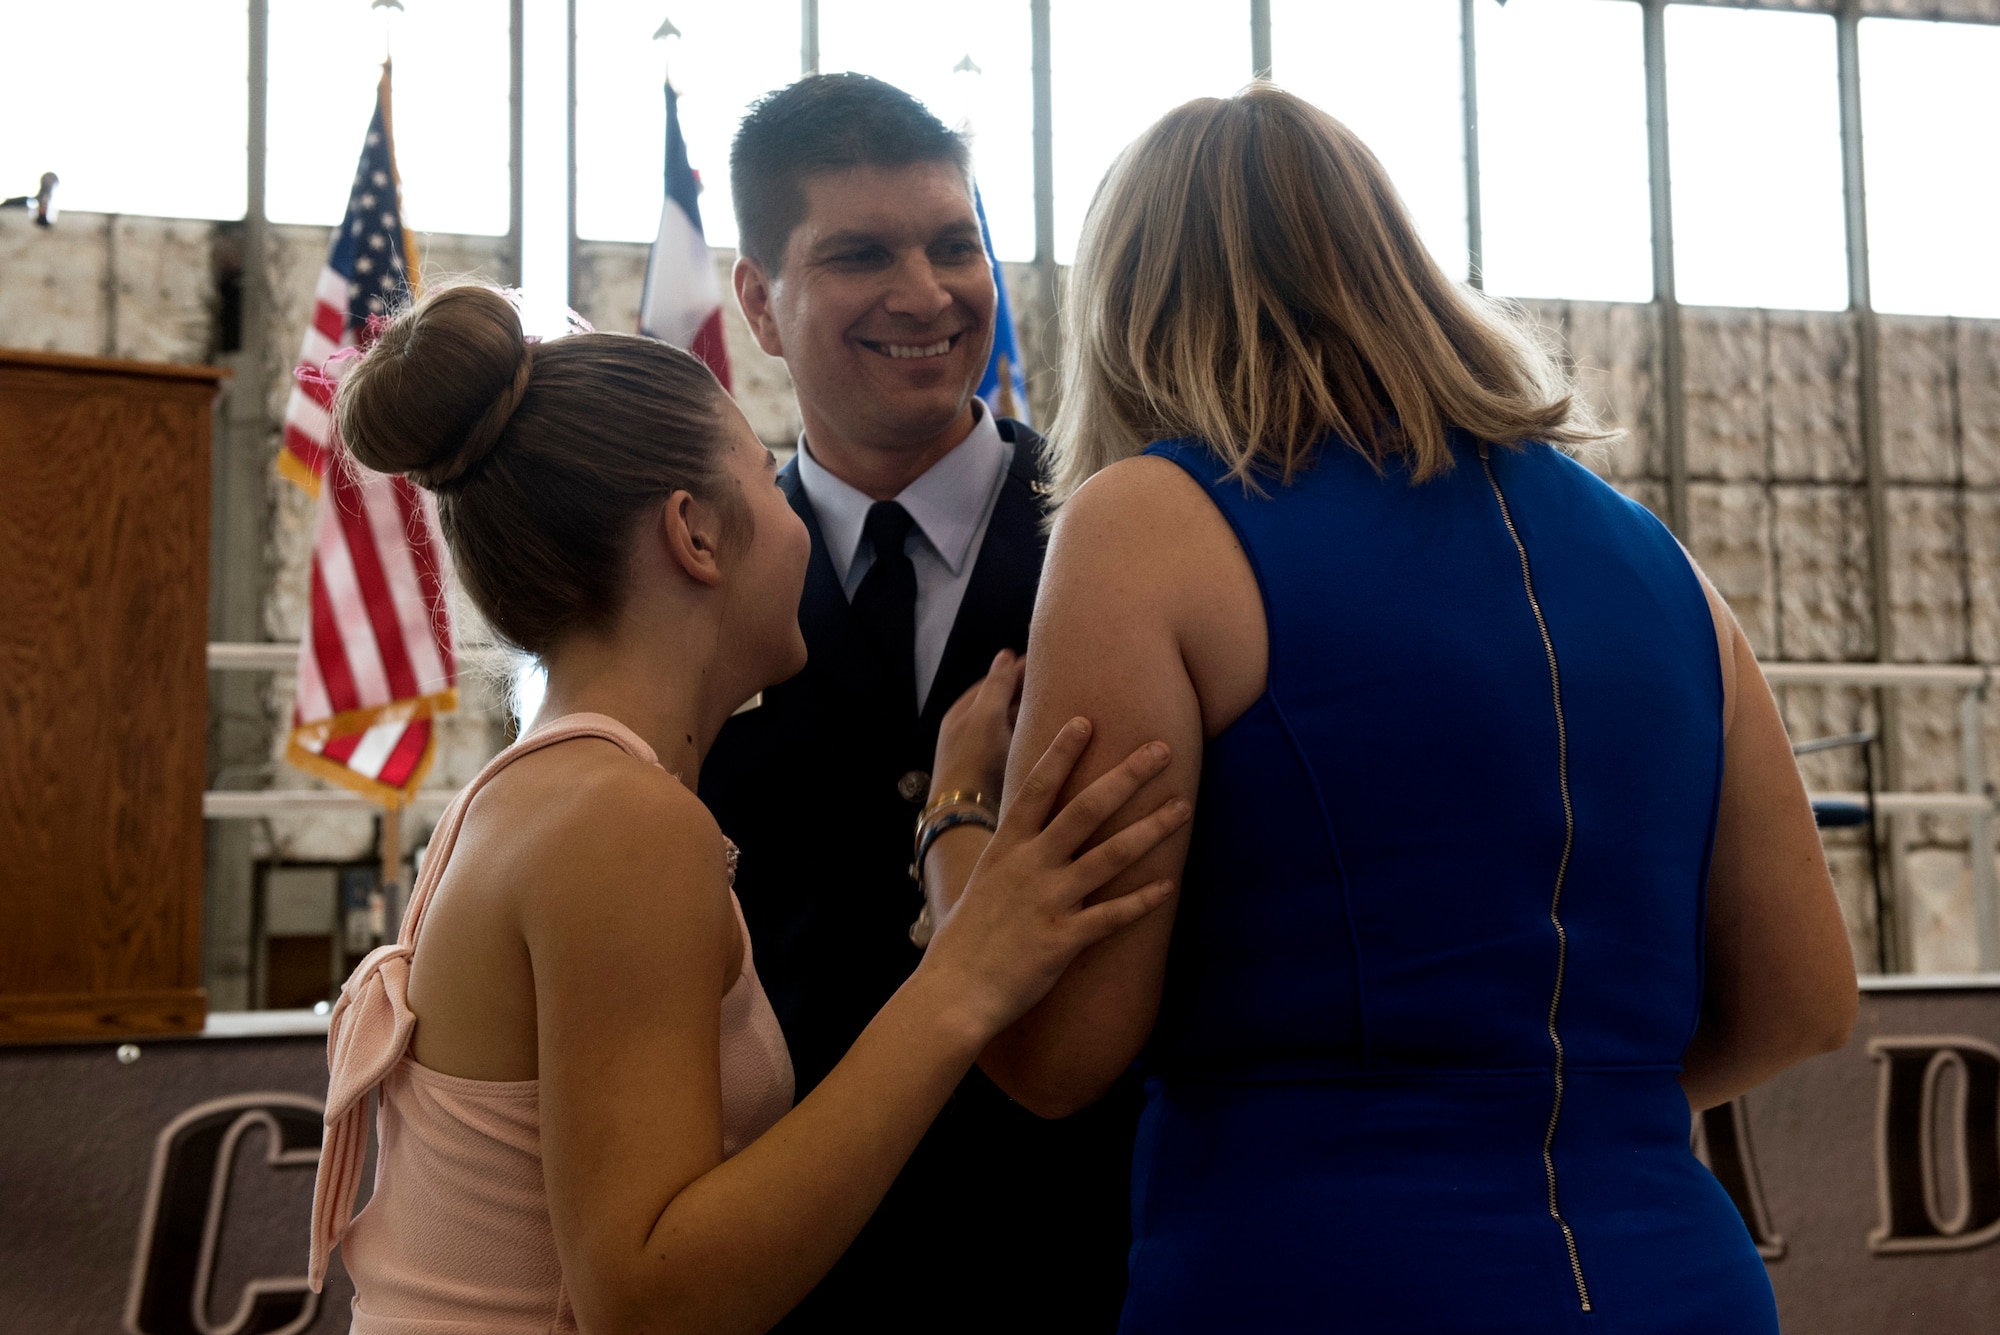 Lt. Col. Paul Feichtinger celebrates with his wife and daughter after taking command of the 120th Fighter Squadron, 140th Wing, Colorado Air National Guard on February 20, 2015. (U.S. Air National Guard photo by Staff Sgt. Michelle Alvarez-Rea)